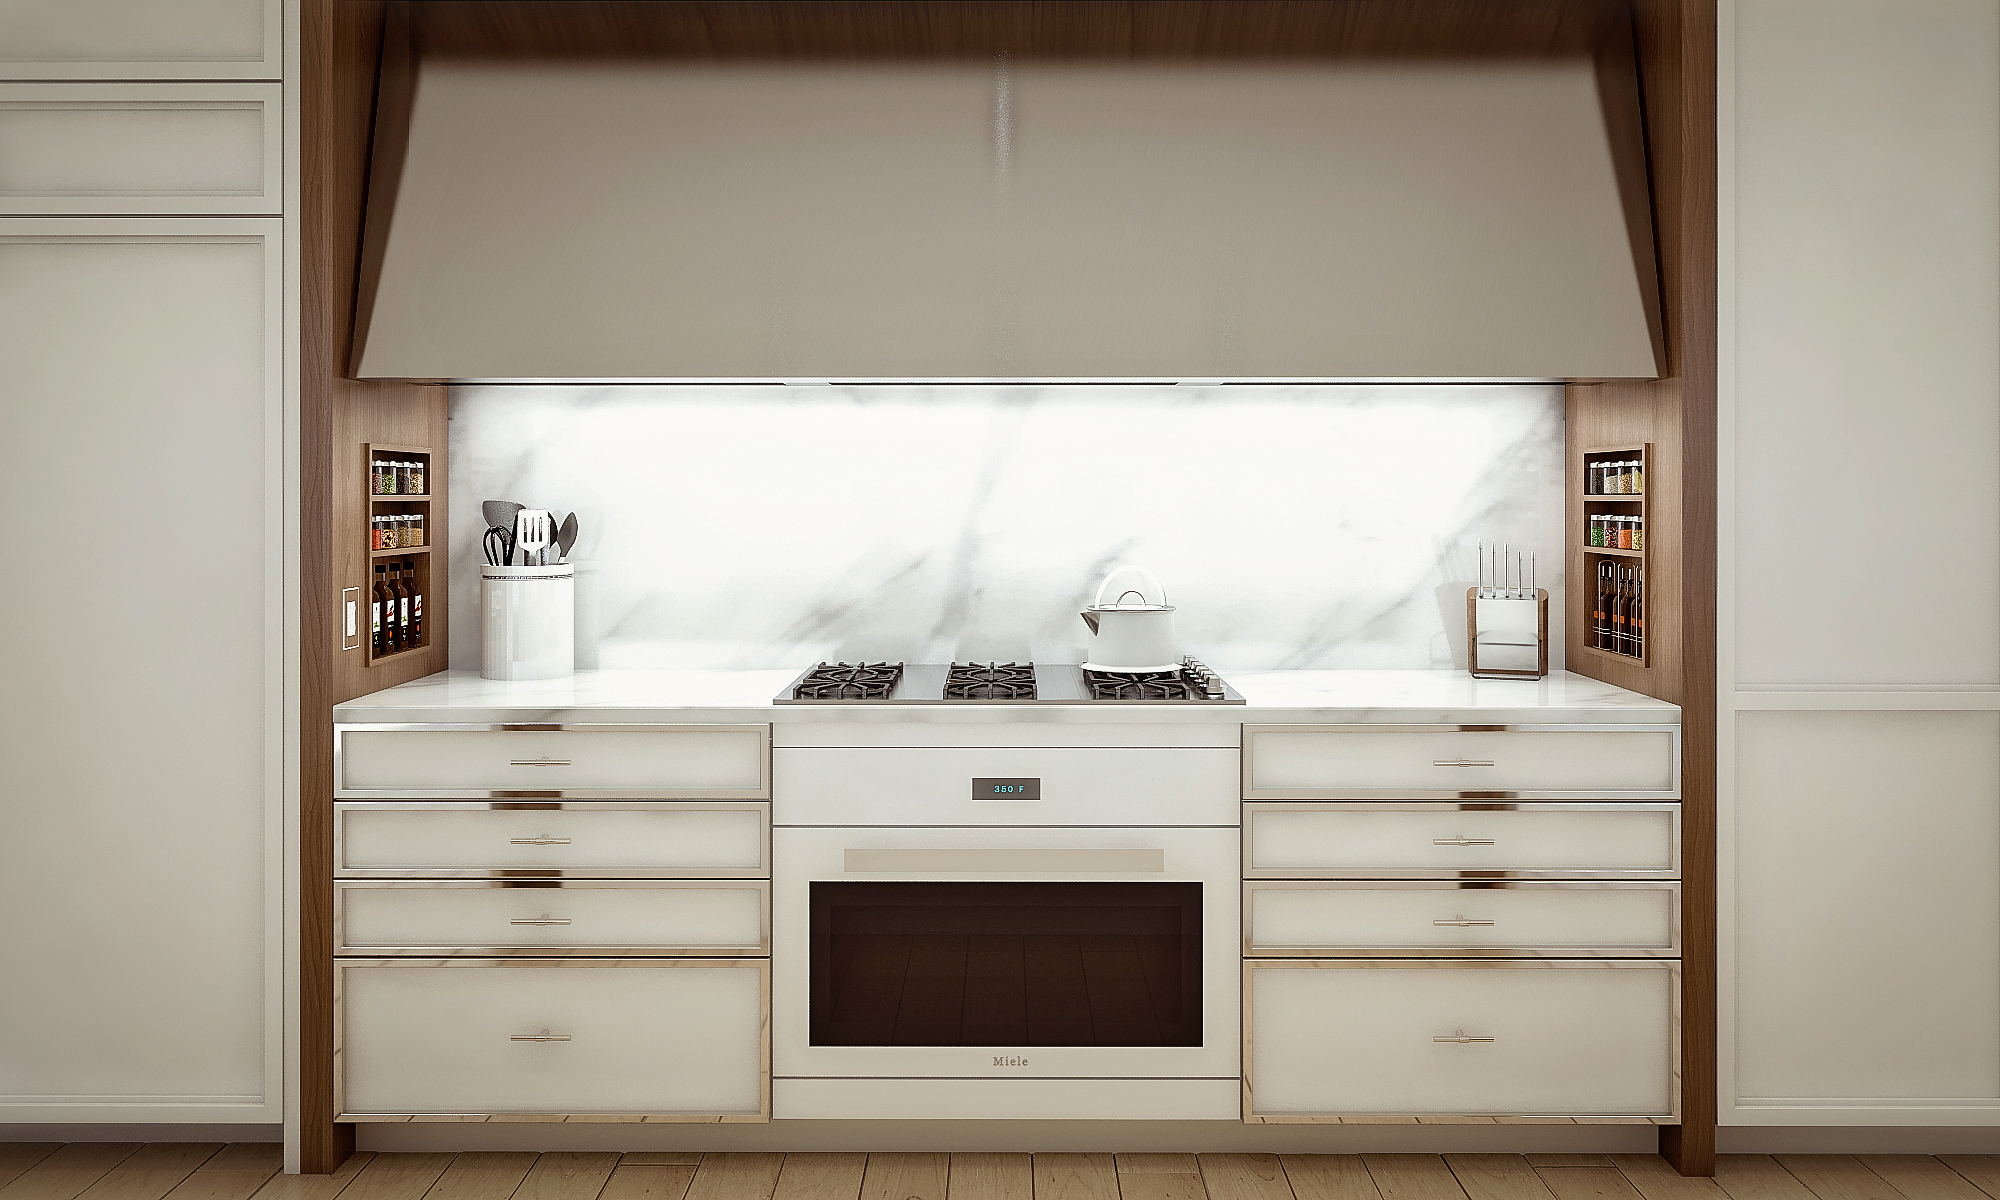 ARCHITECTURAL IMAGERY_IRP KITCHENS__02.jpg